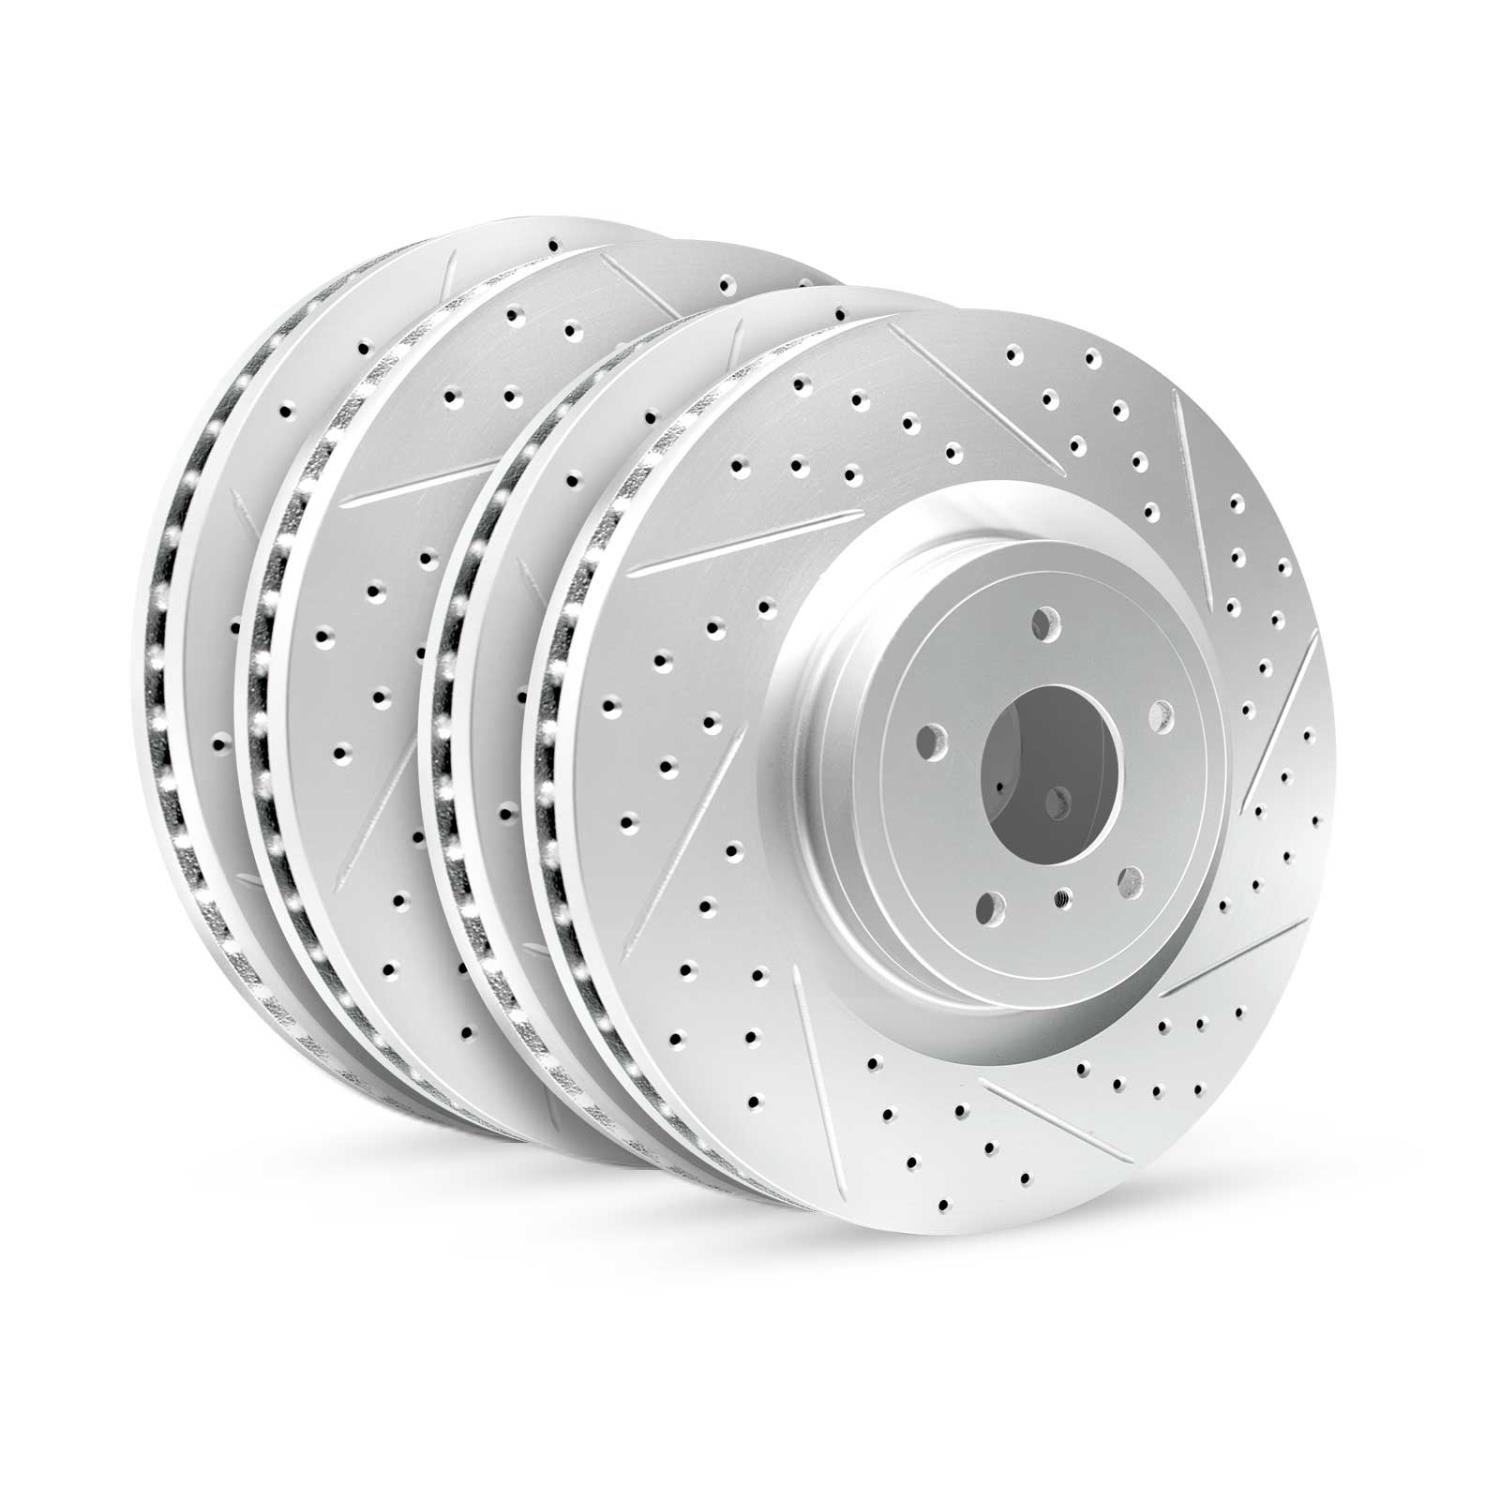 GEO-Carbon Drilled/Slotted Rotors, 2000-2004 Ford/Mazda,